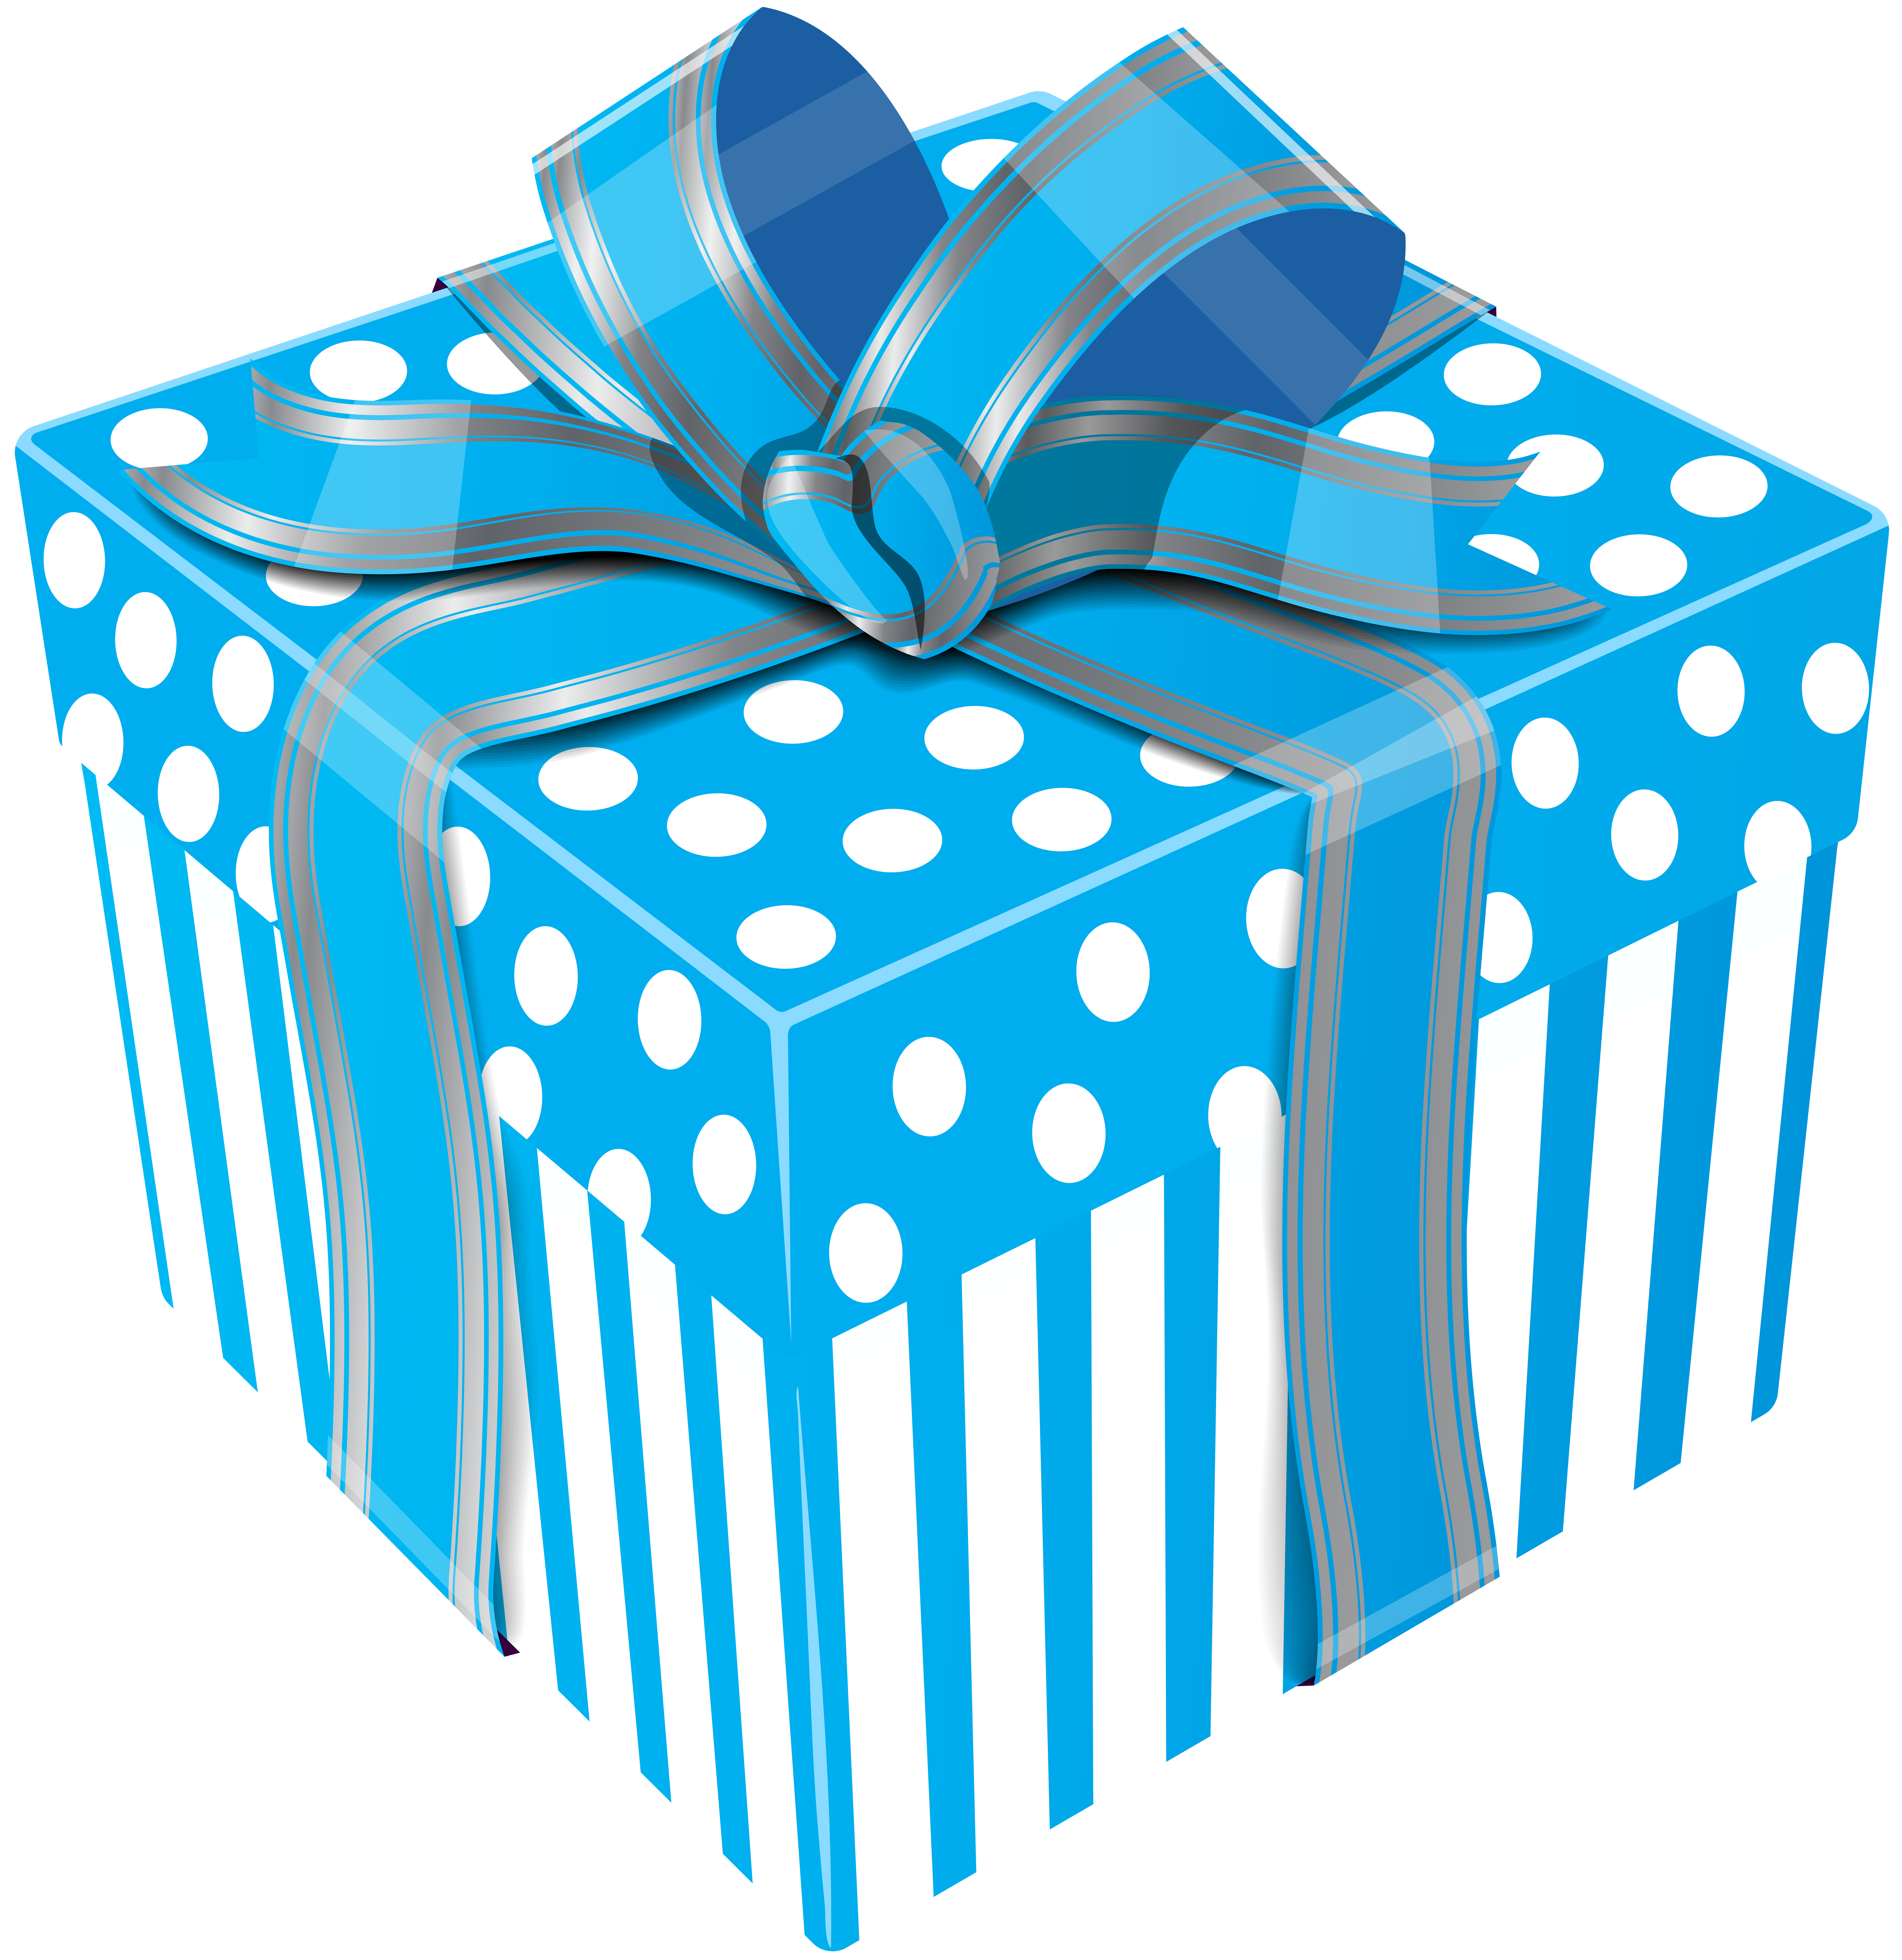 gift clipart teal